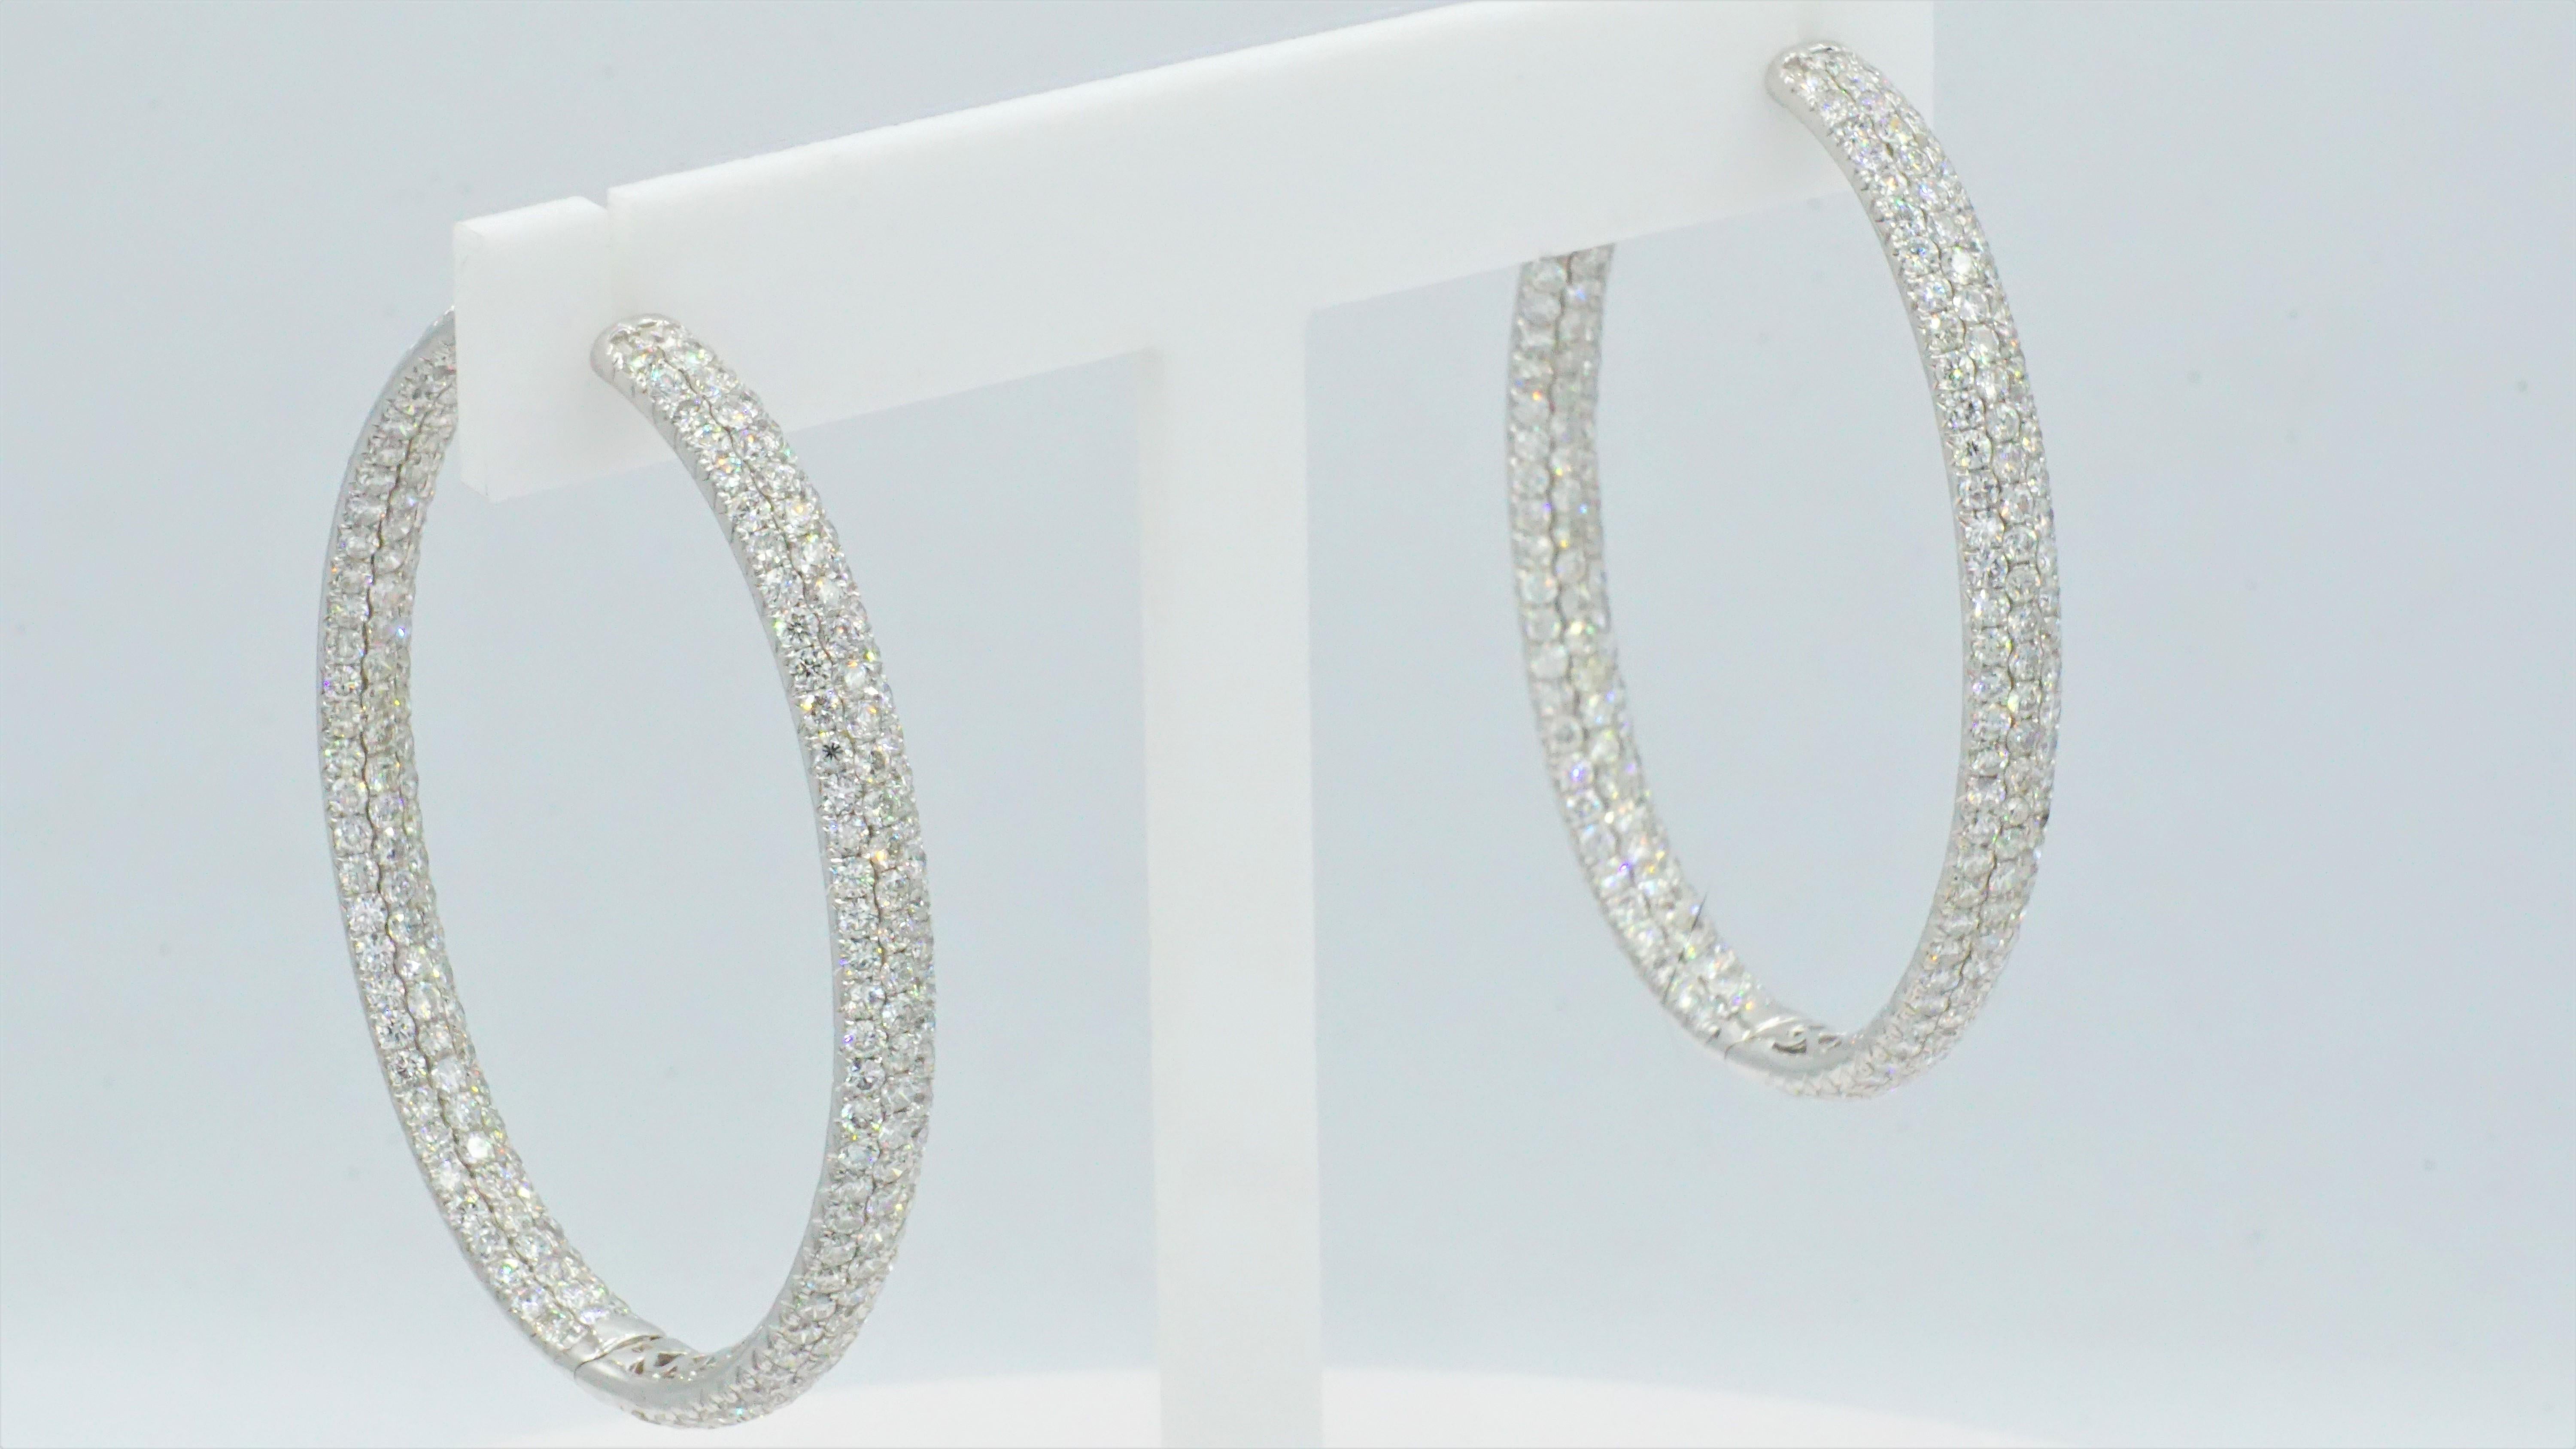 Beautifully-crafted 18kt white gold, hinged oval-shaped, inside-out pave diamond hoop earrings. These are stunning earrings in very condition and appears to be hardly worn.  Each earring measures 1 inch by 1.75 inches. Both earrings combined have a